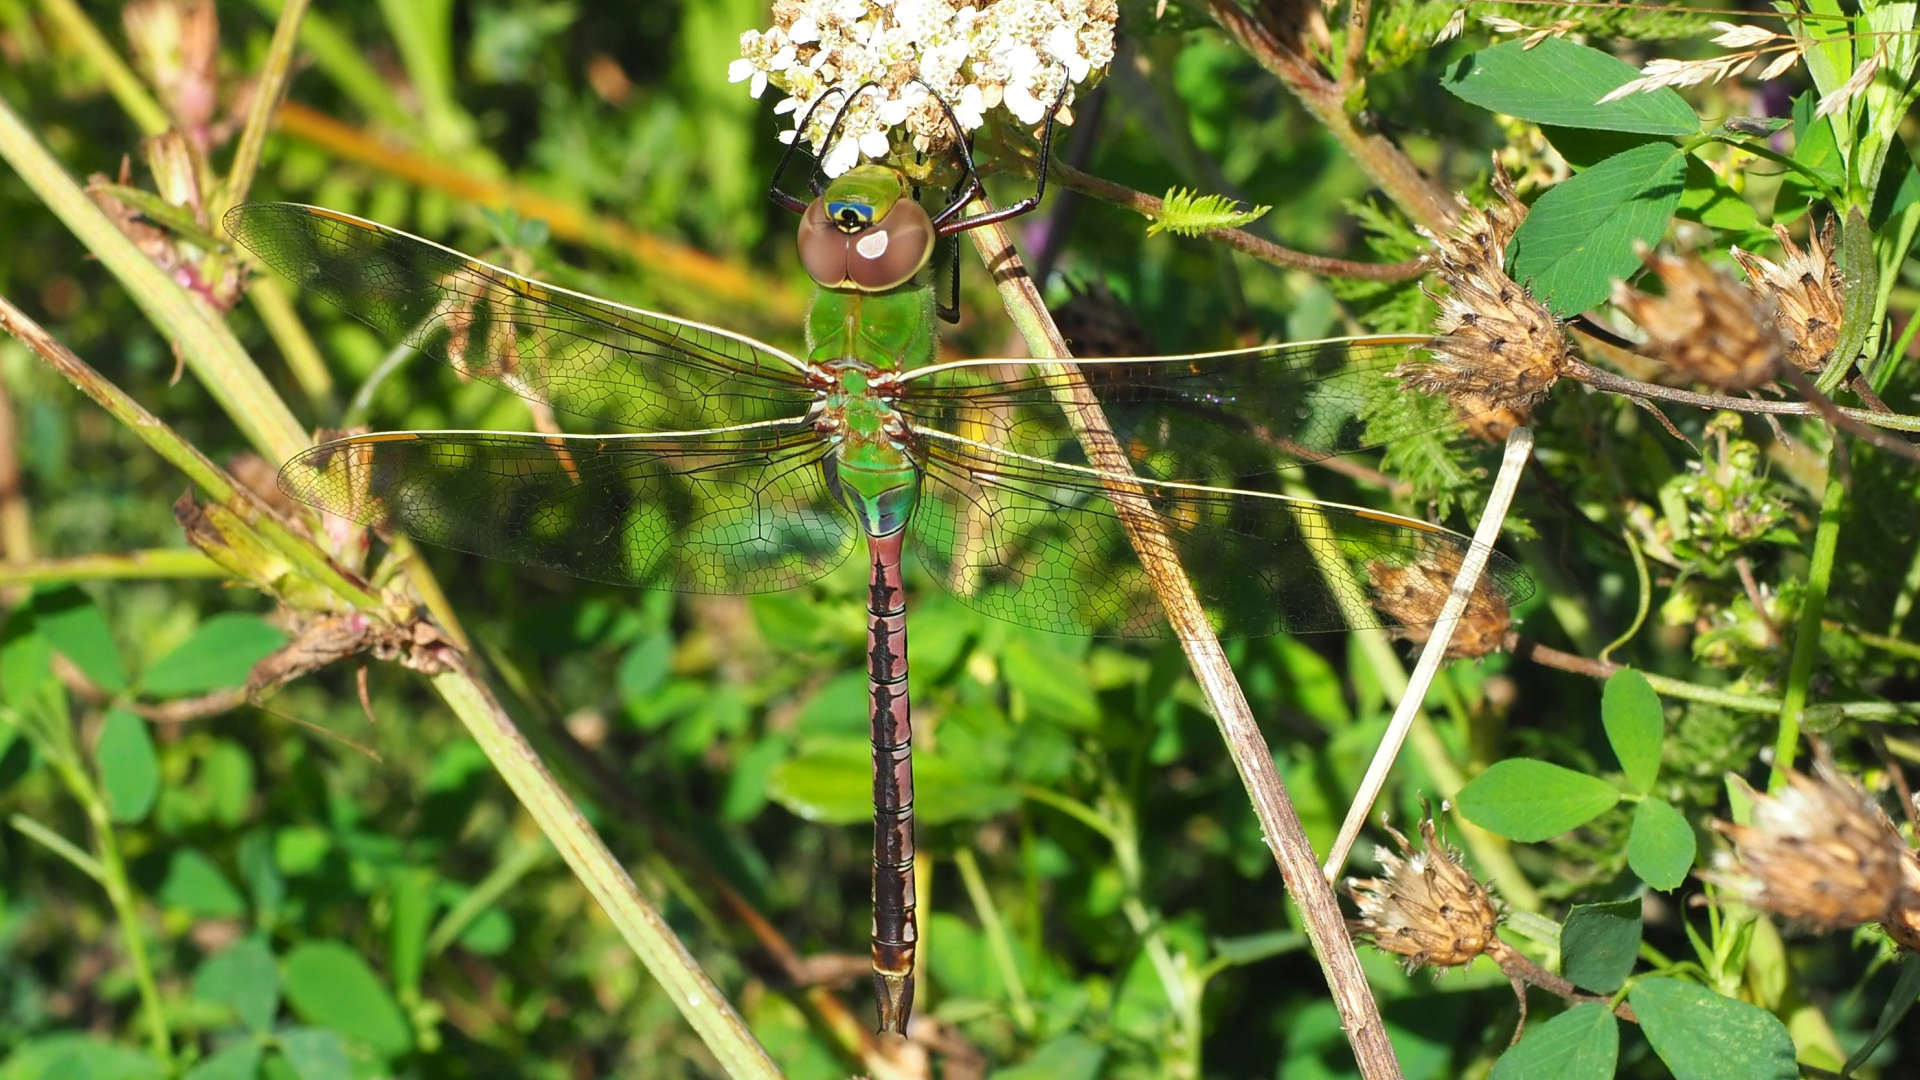 The green darner is a common dragonfly in Ontario that overwinters farther south. Photograph by Antonia Guidotti.